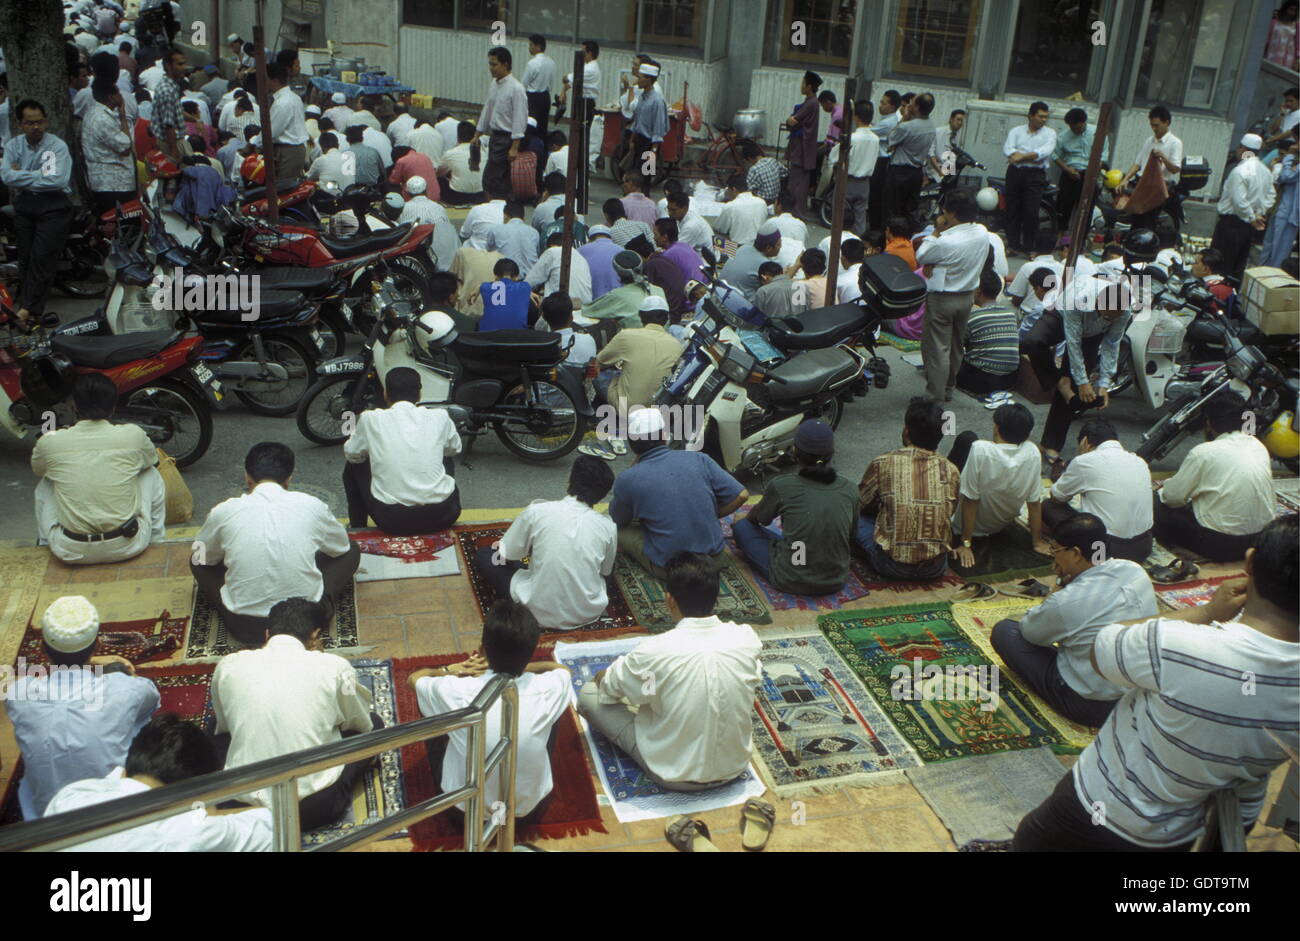 Muslim prayers at a Mosque in the city of  Kuala Lumpur in Malaysia in southeastasia. Stock Photo